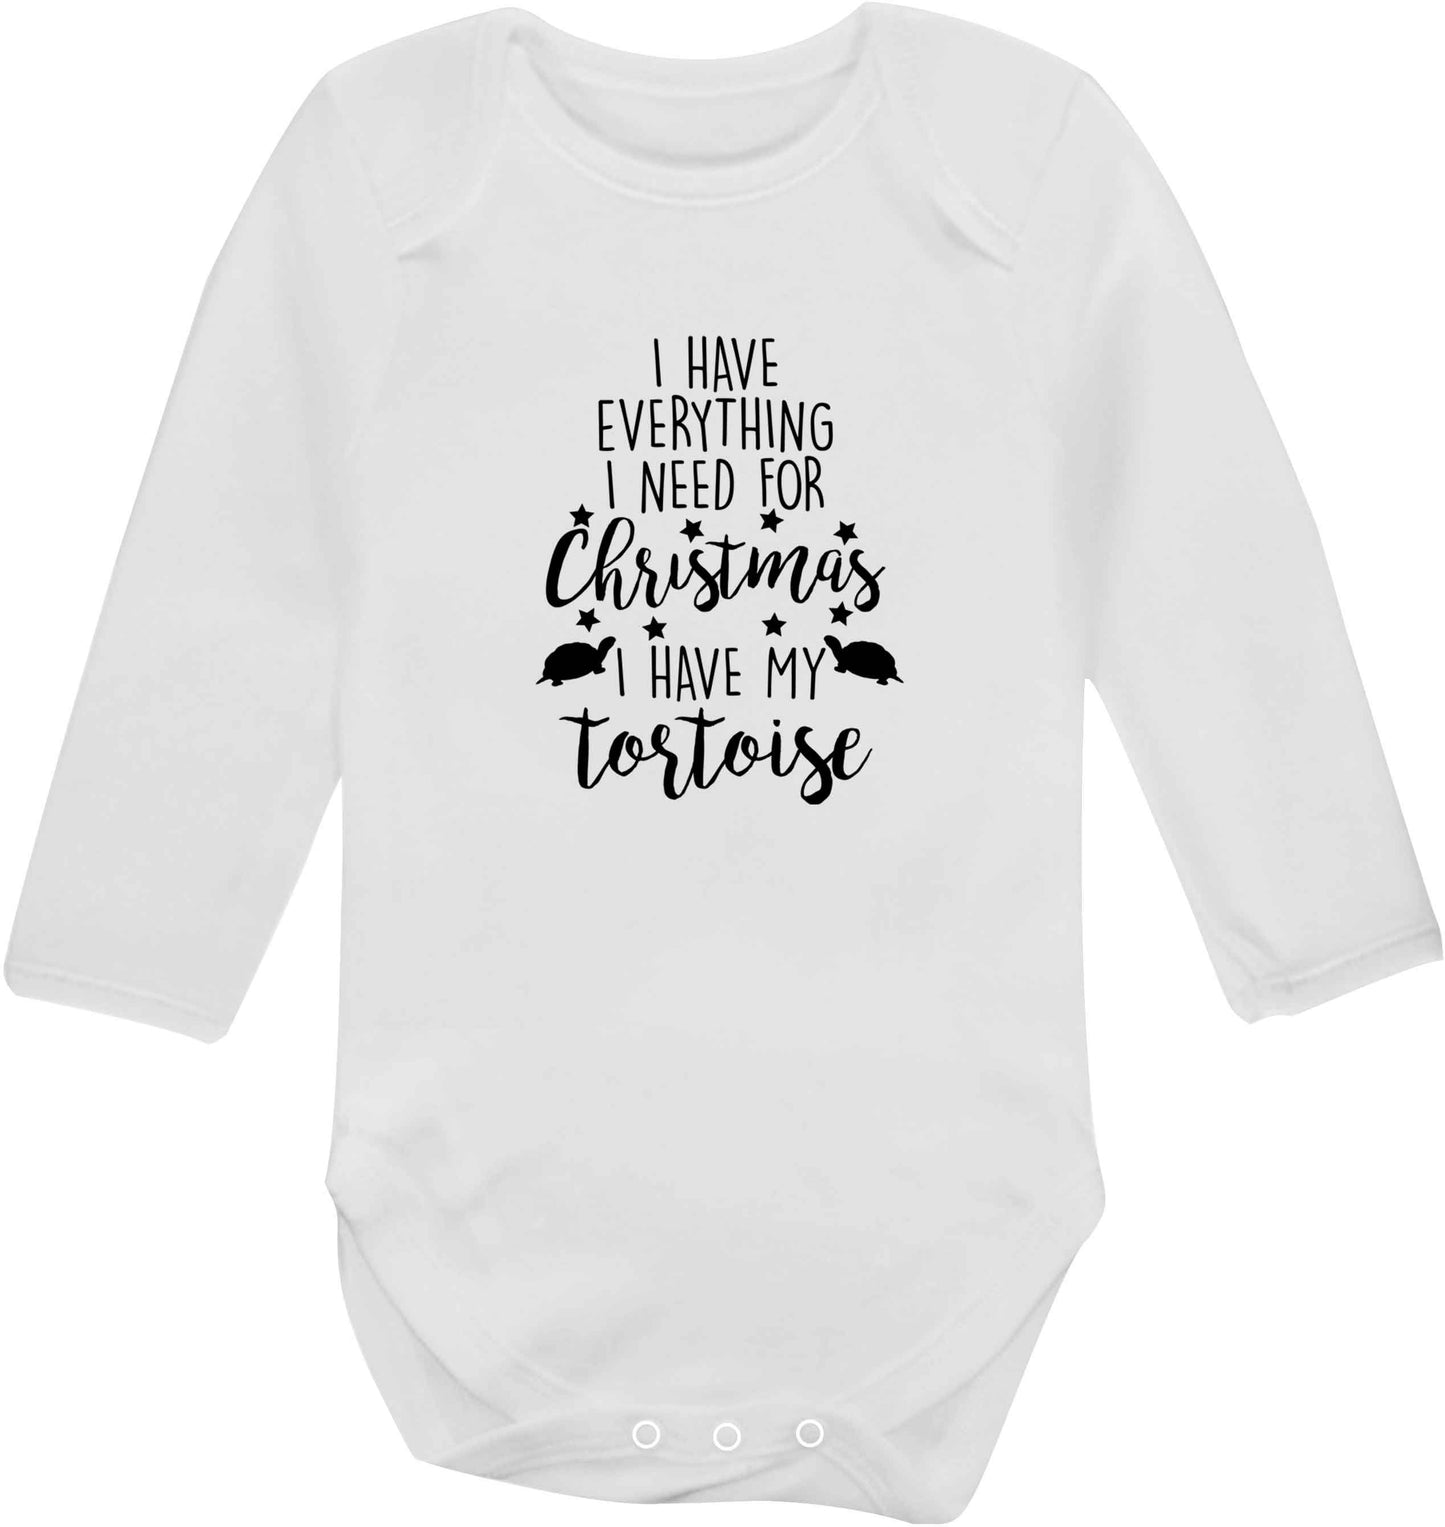 I have everything I need for Christmas I have my tortoise baby vest long sleeved white 6-12 months